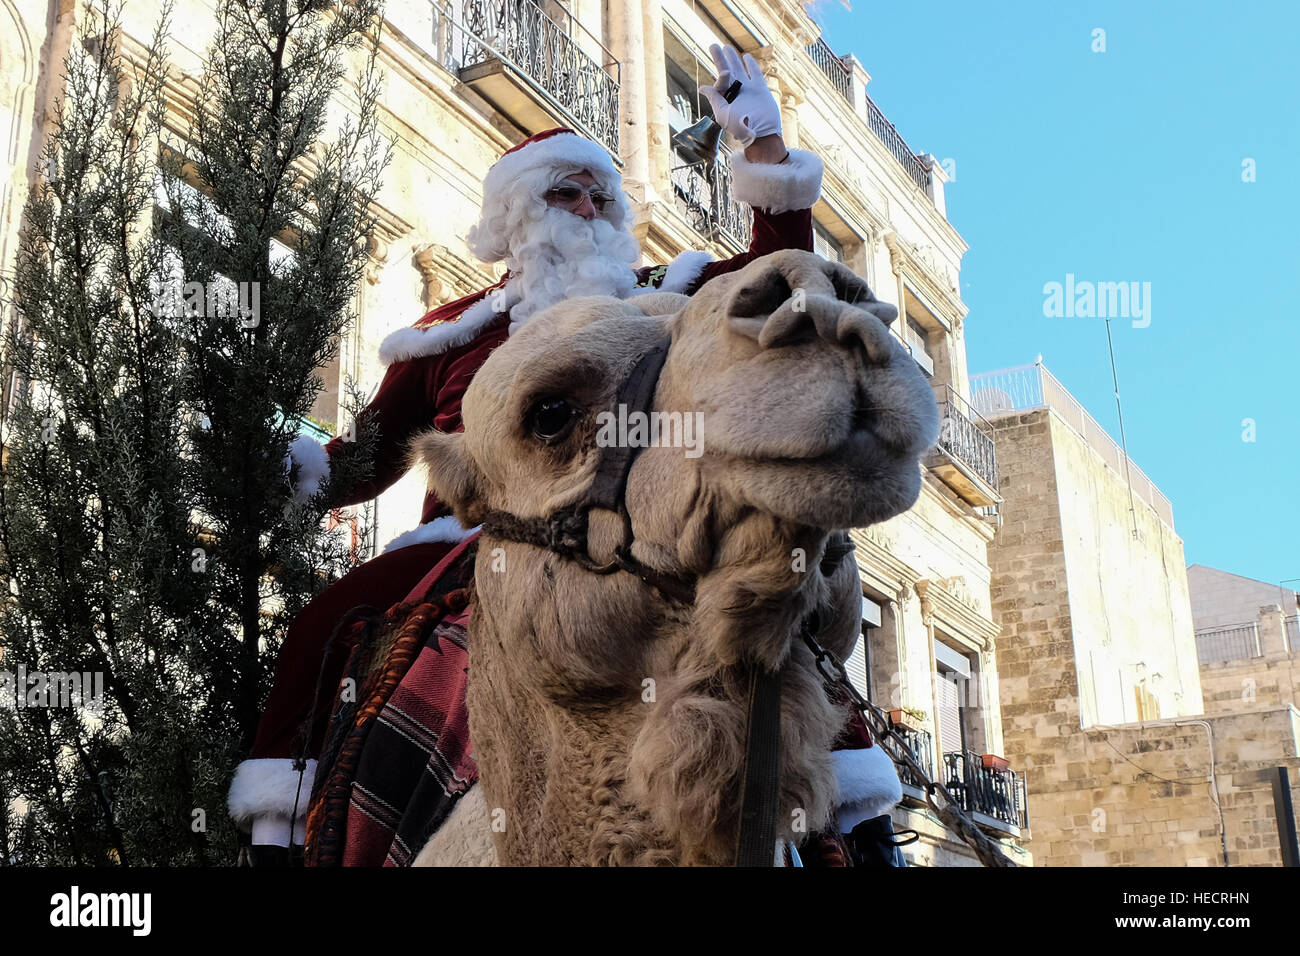 Jerusalem, Israel. 20th December, 2016. Santa Claus, or 'Baba Noel' as he is called in the local Arab language, emerges from the Latin Patriarch Road in Jerusalem's Old City riding a camel substituting for rain deer. The Jerusalem Municipality and the Jewish National Fund distributed specially grown Cyprus Cedar Christmas trees to the Christian population at the Jaffa Gate. Credit: Nir Alon/Alamy Live News Stock Photo